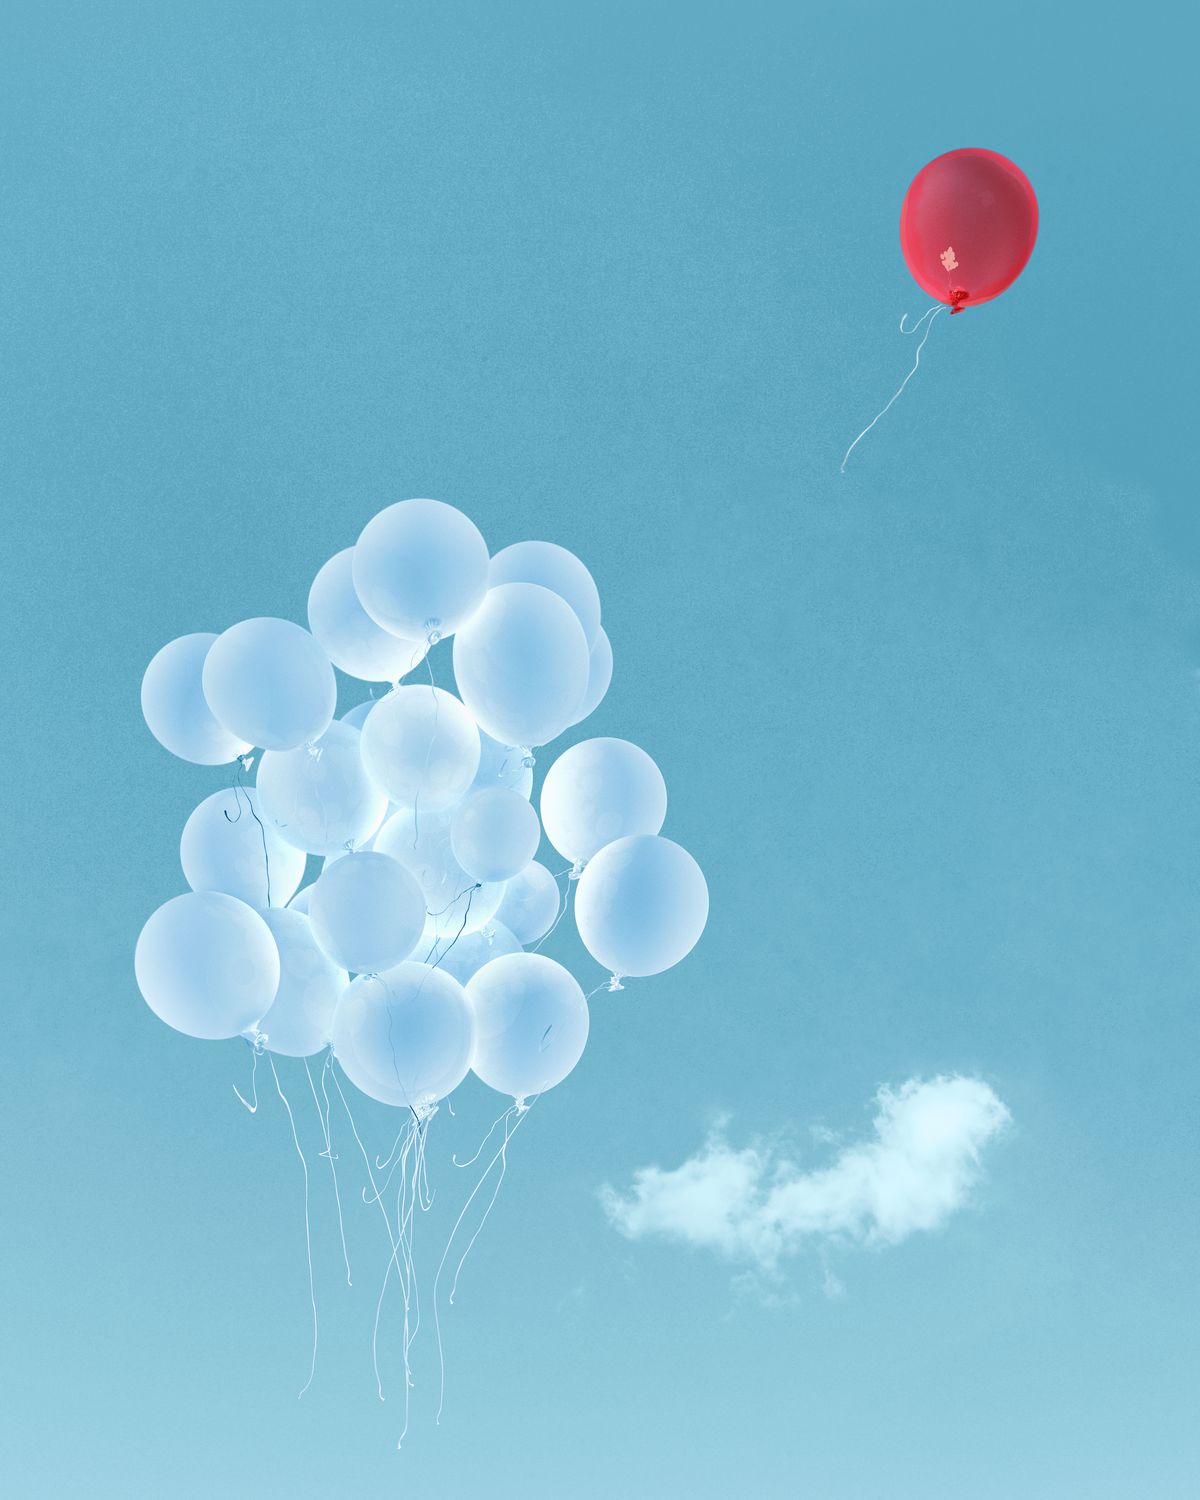 red balloon flying away from white balloons against blue sky